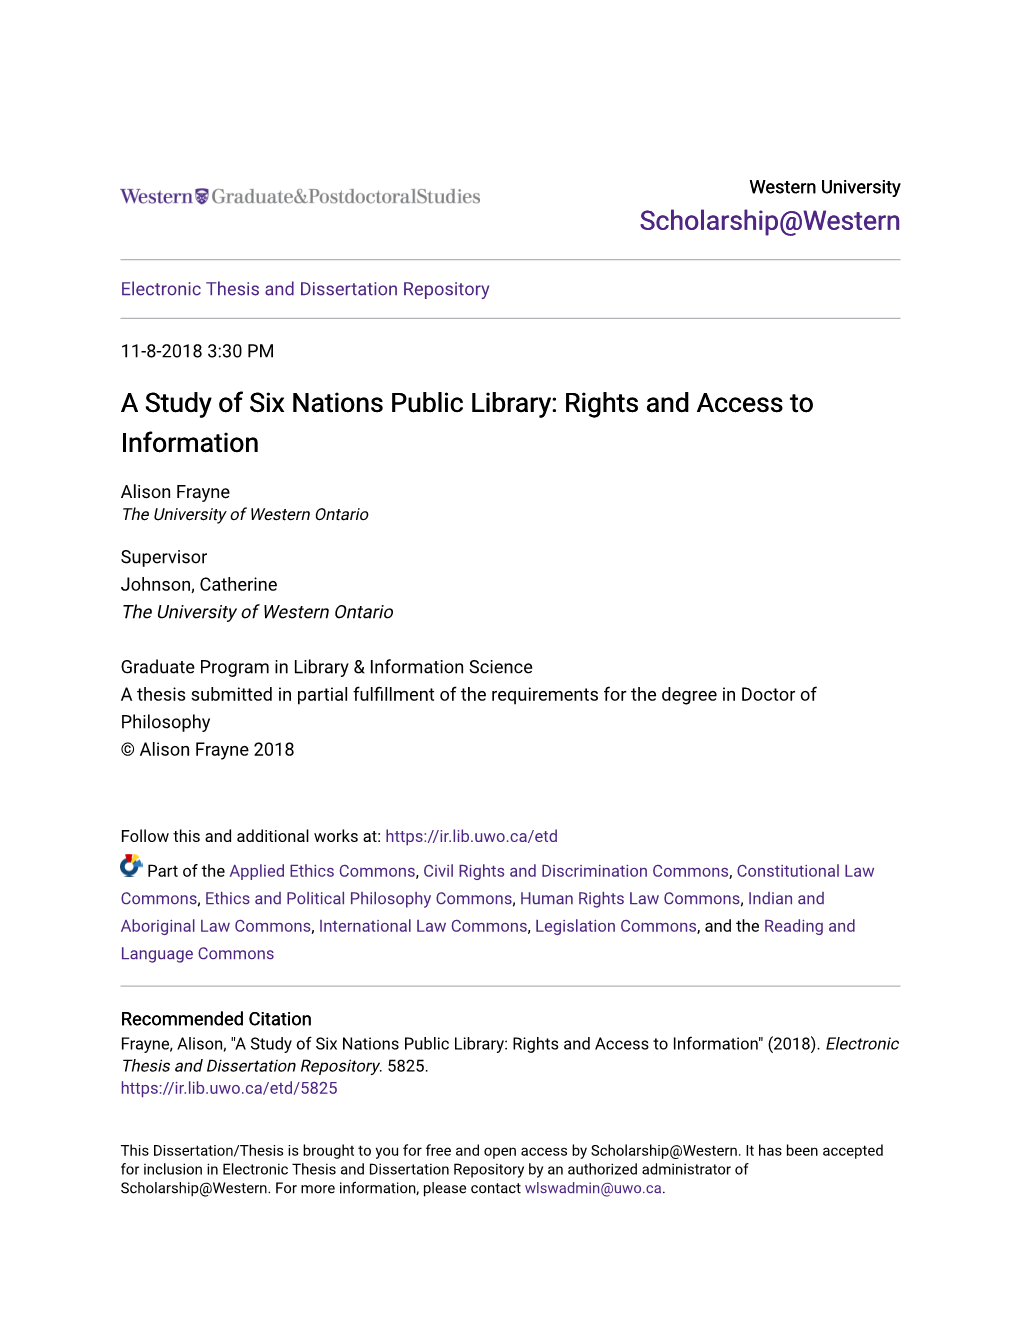 A Study of Six Nations Public Library: Rights and Access to Information